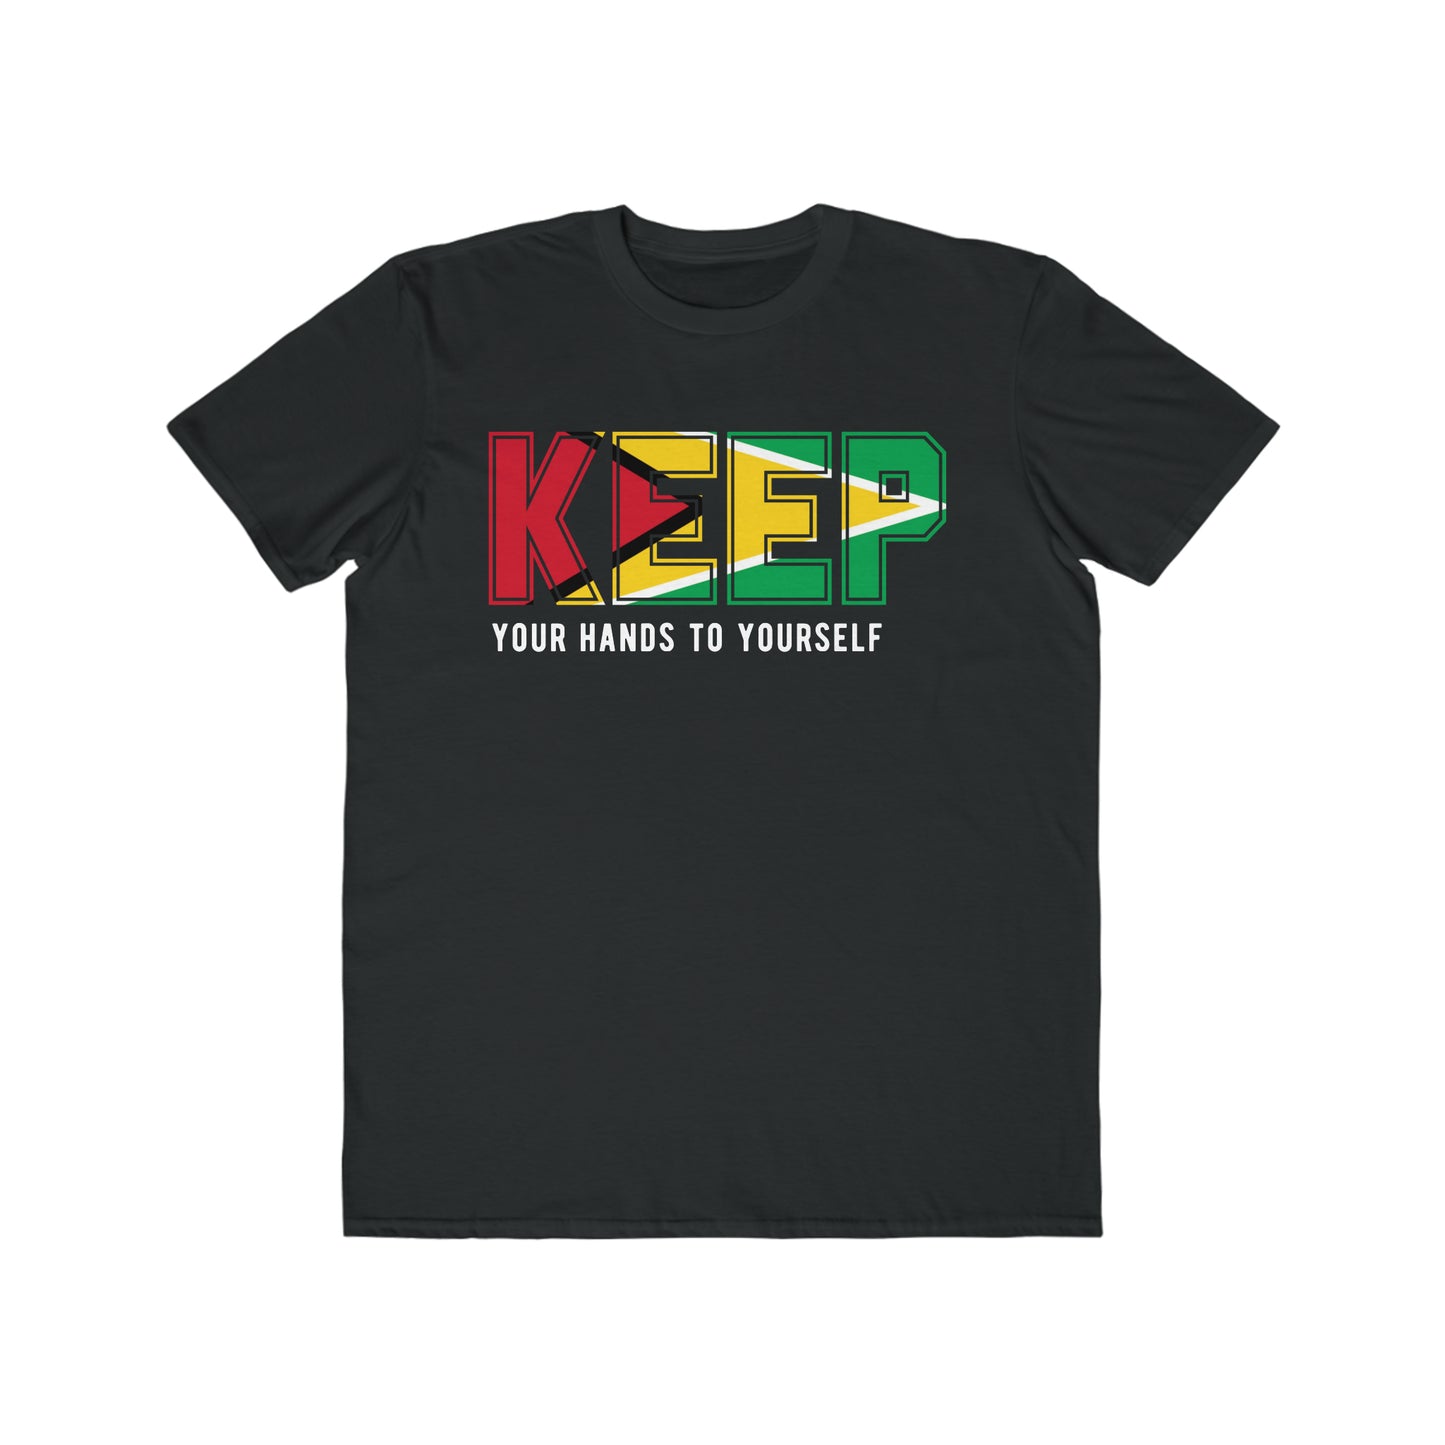 Keep Your Hands To Yourself Sexual Abuse Awareness Men's Lightweight Fashion Tee by Guyanese Swag